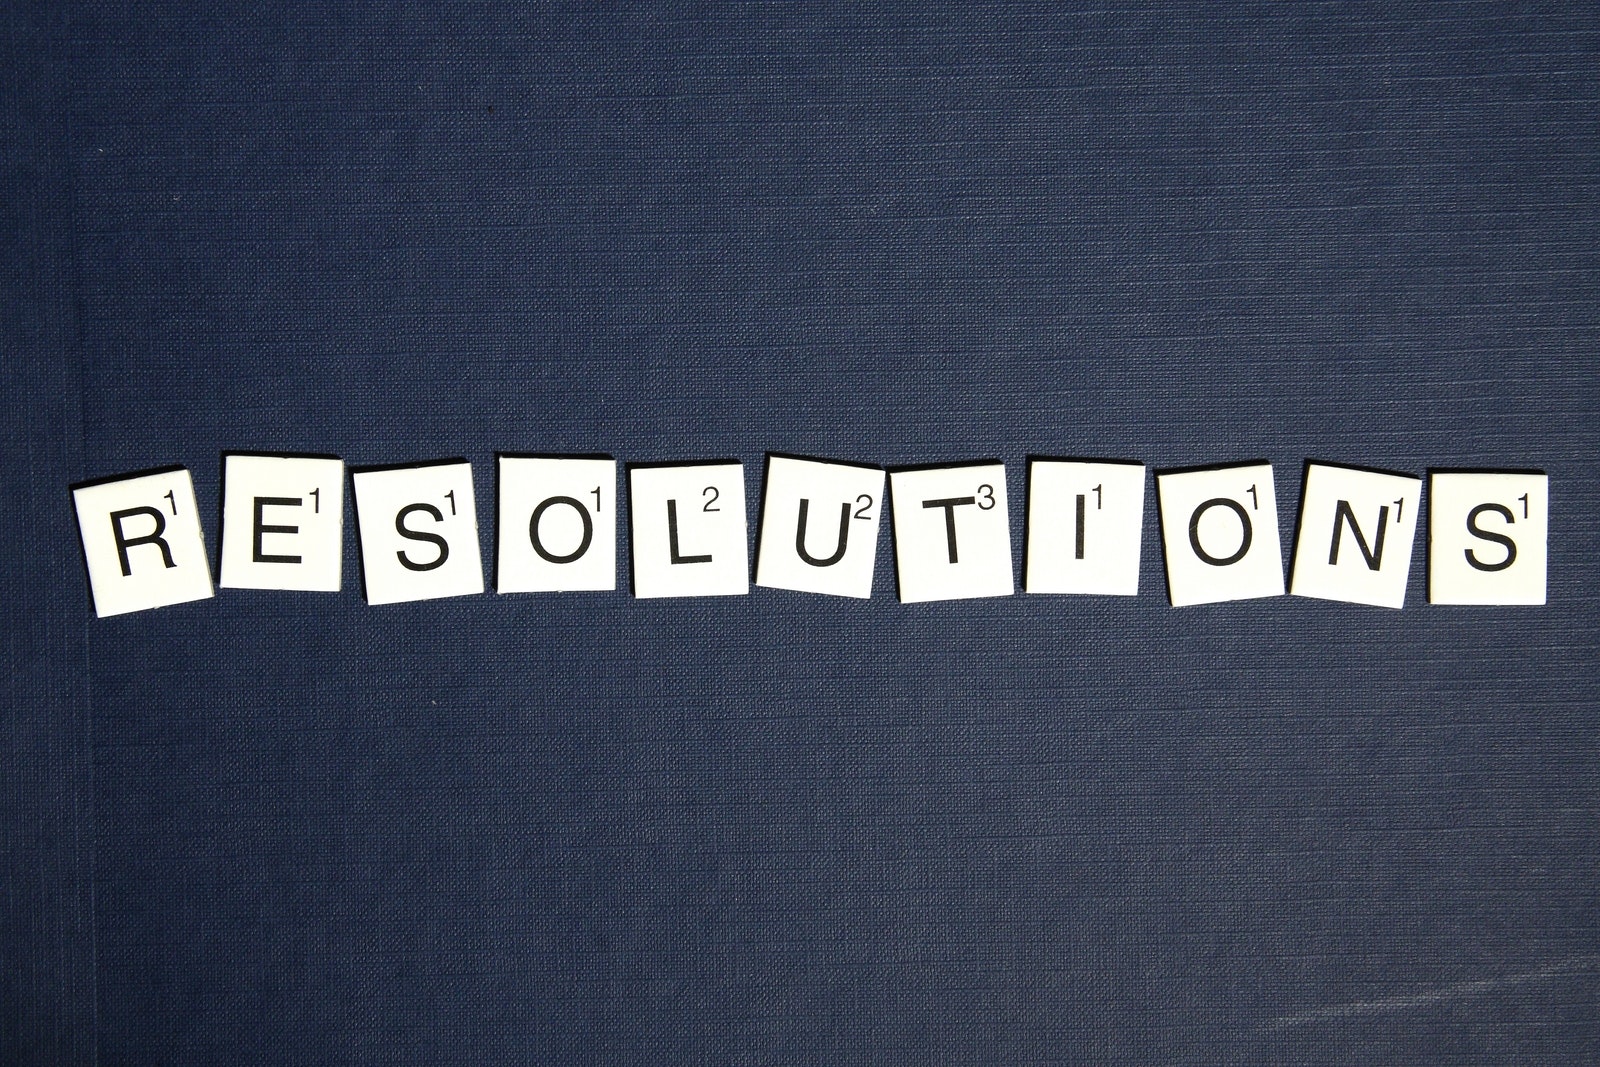 tiles spelling out resolutions